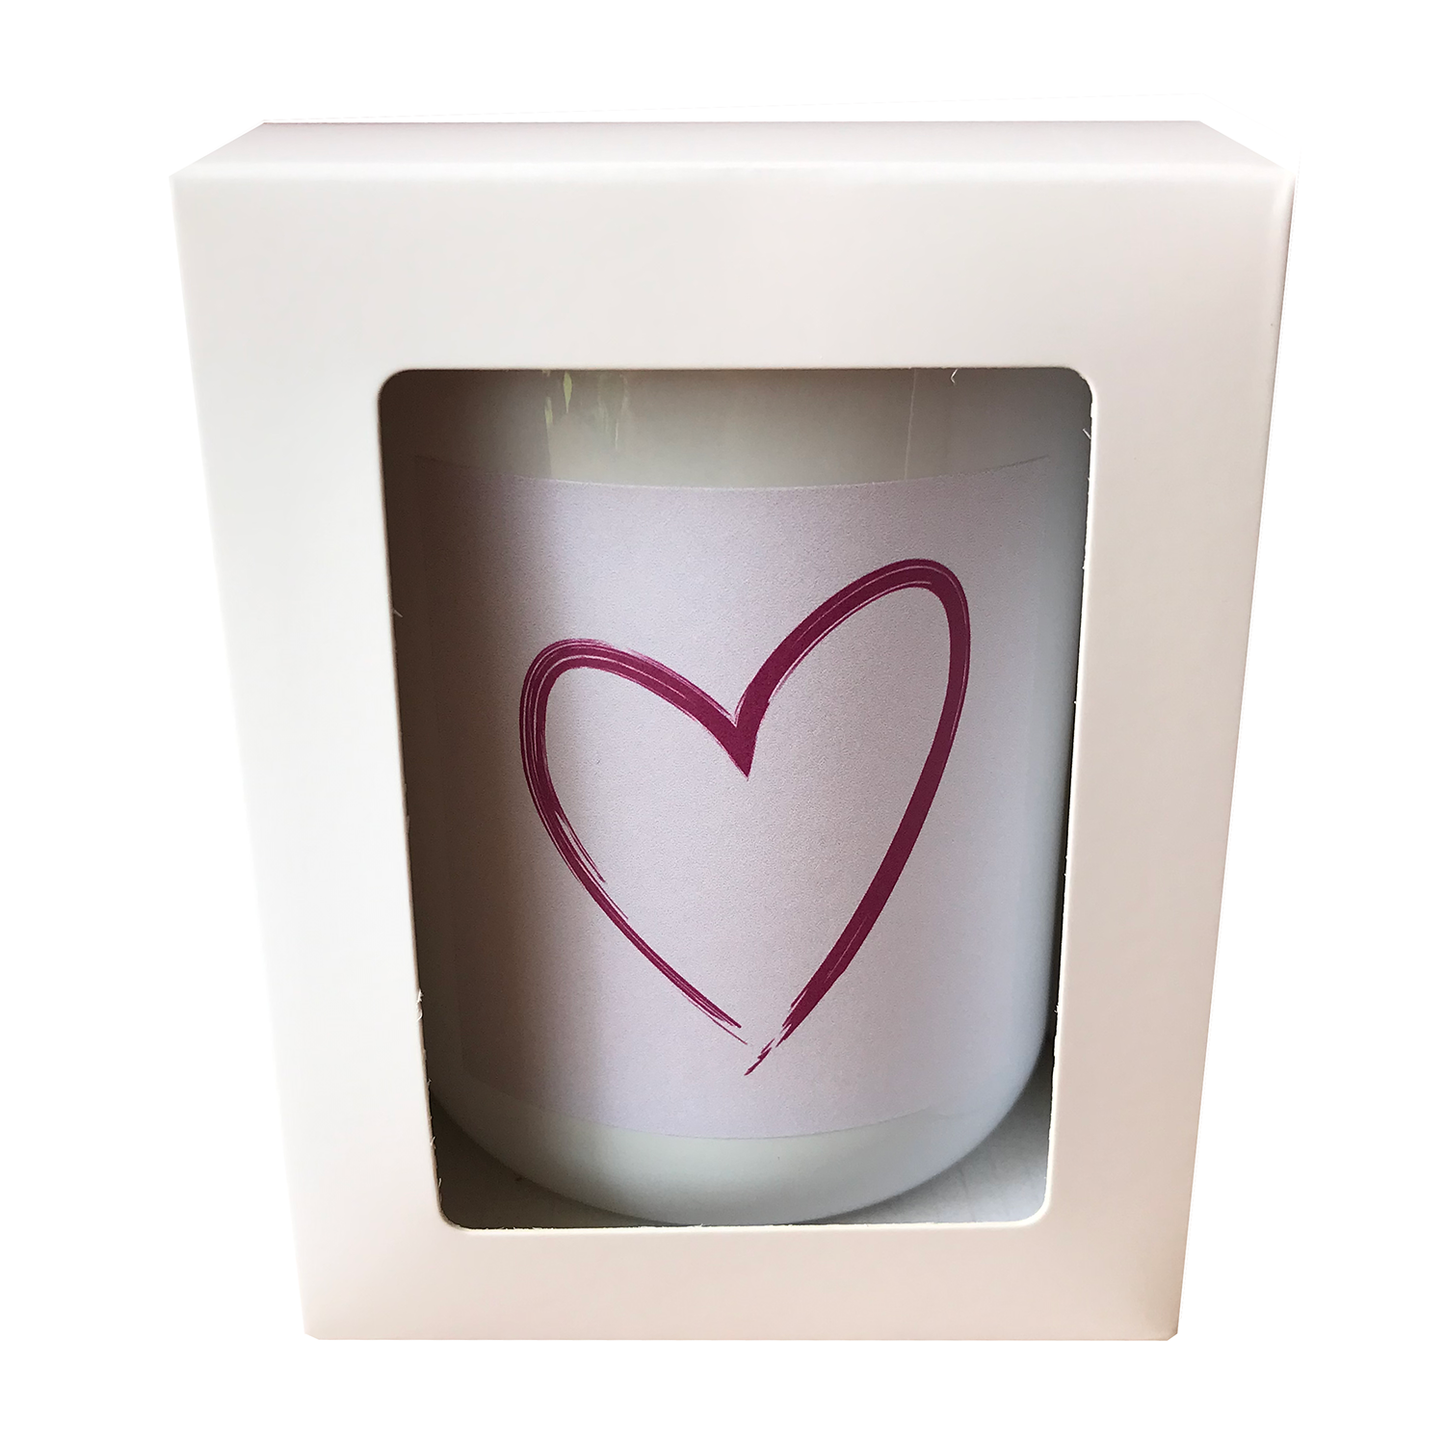 Hunter Gatherer / Pure soy wax shell candle / LOVE HEART DESIGN / Boxed